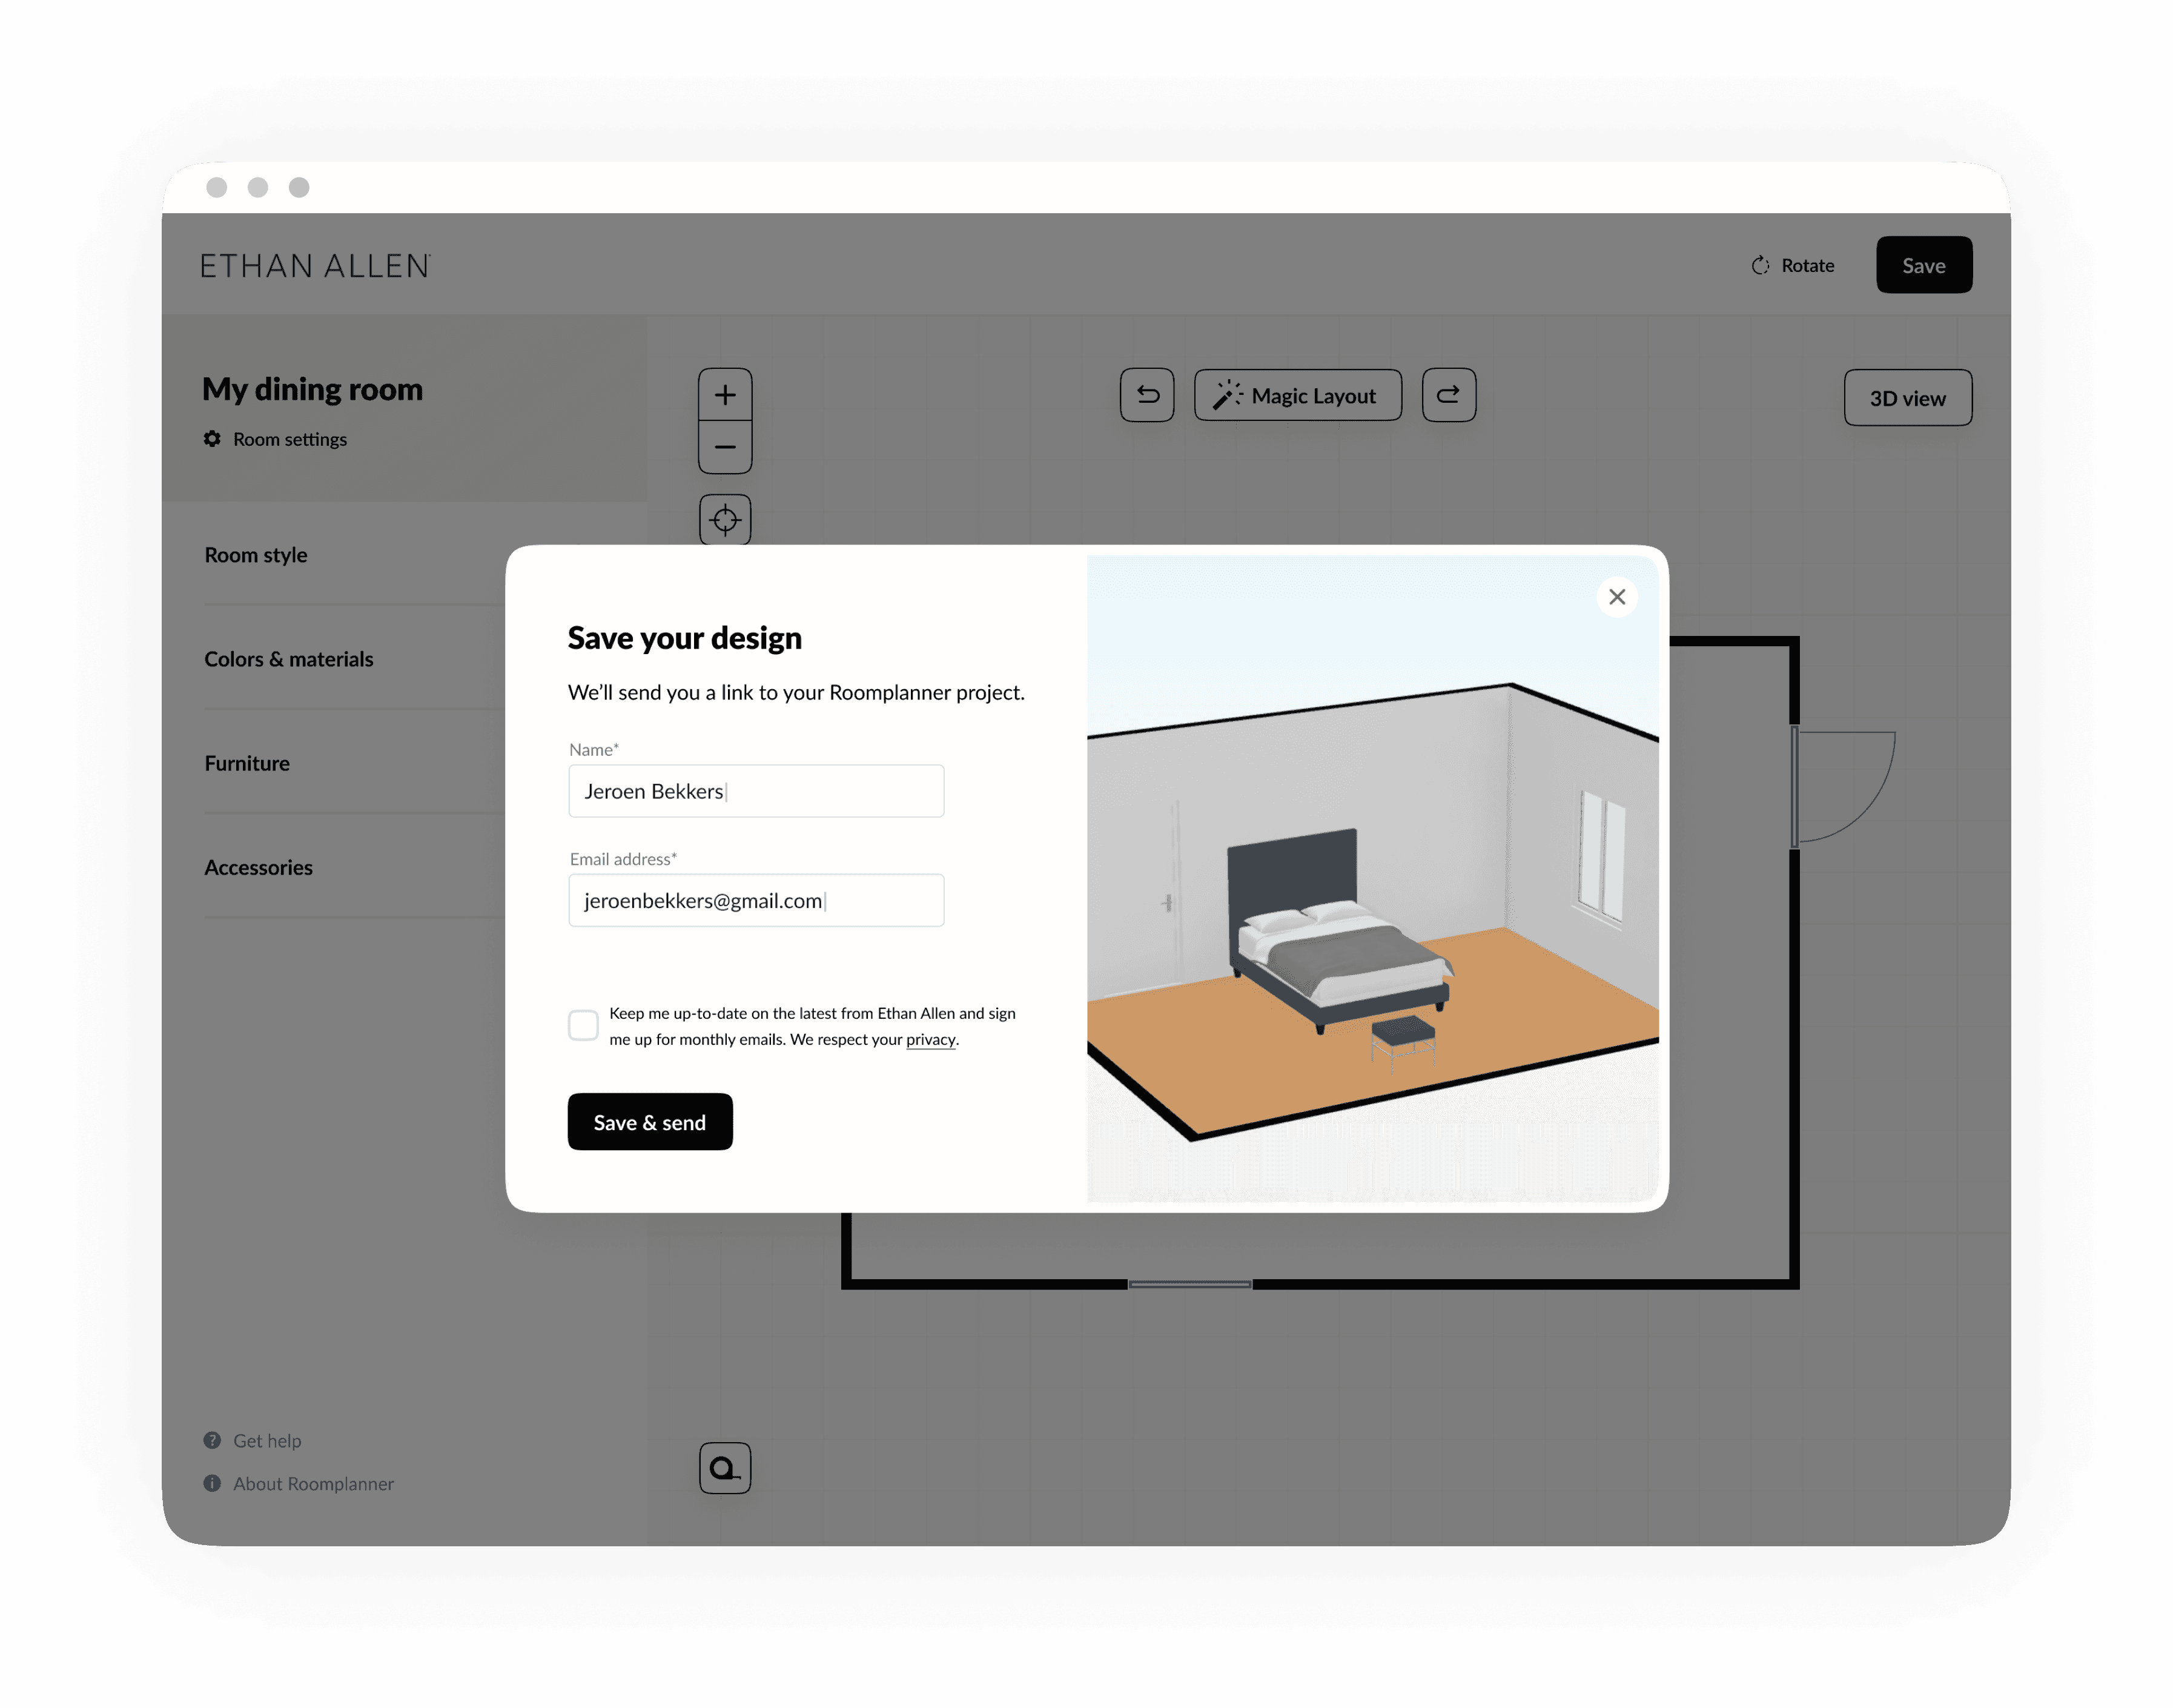 New modal in which design can be saved.